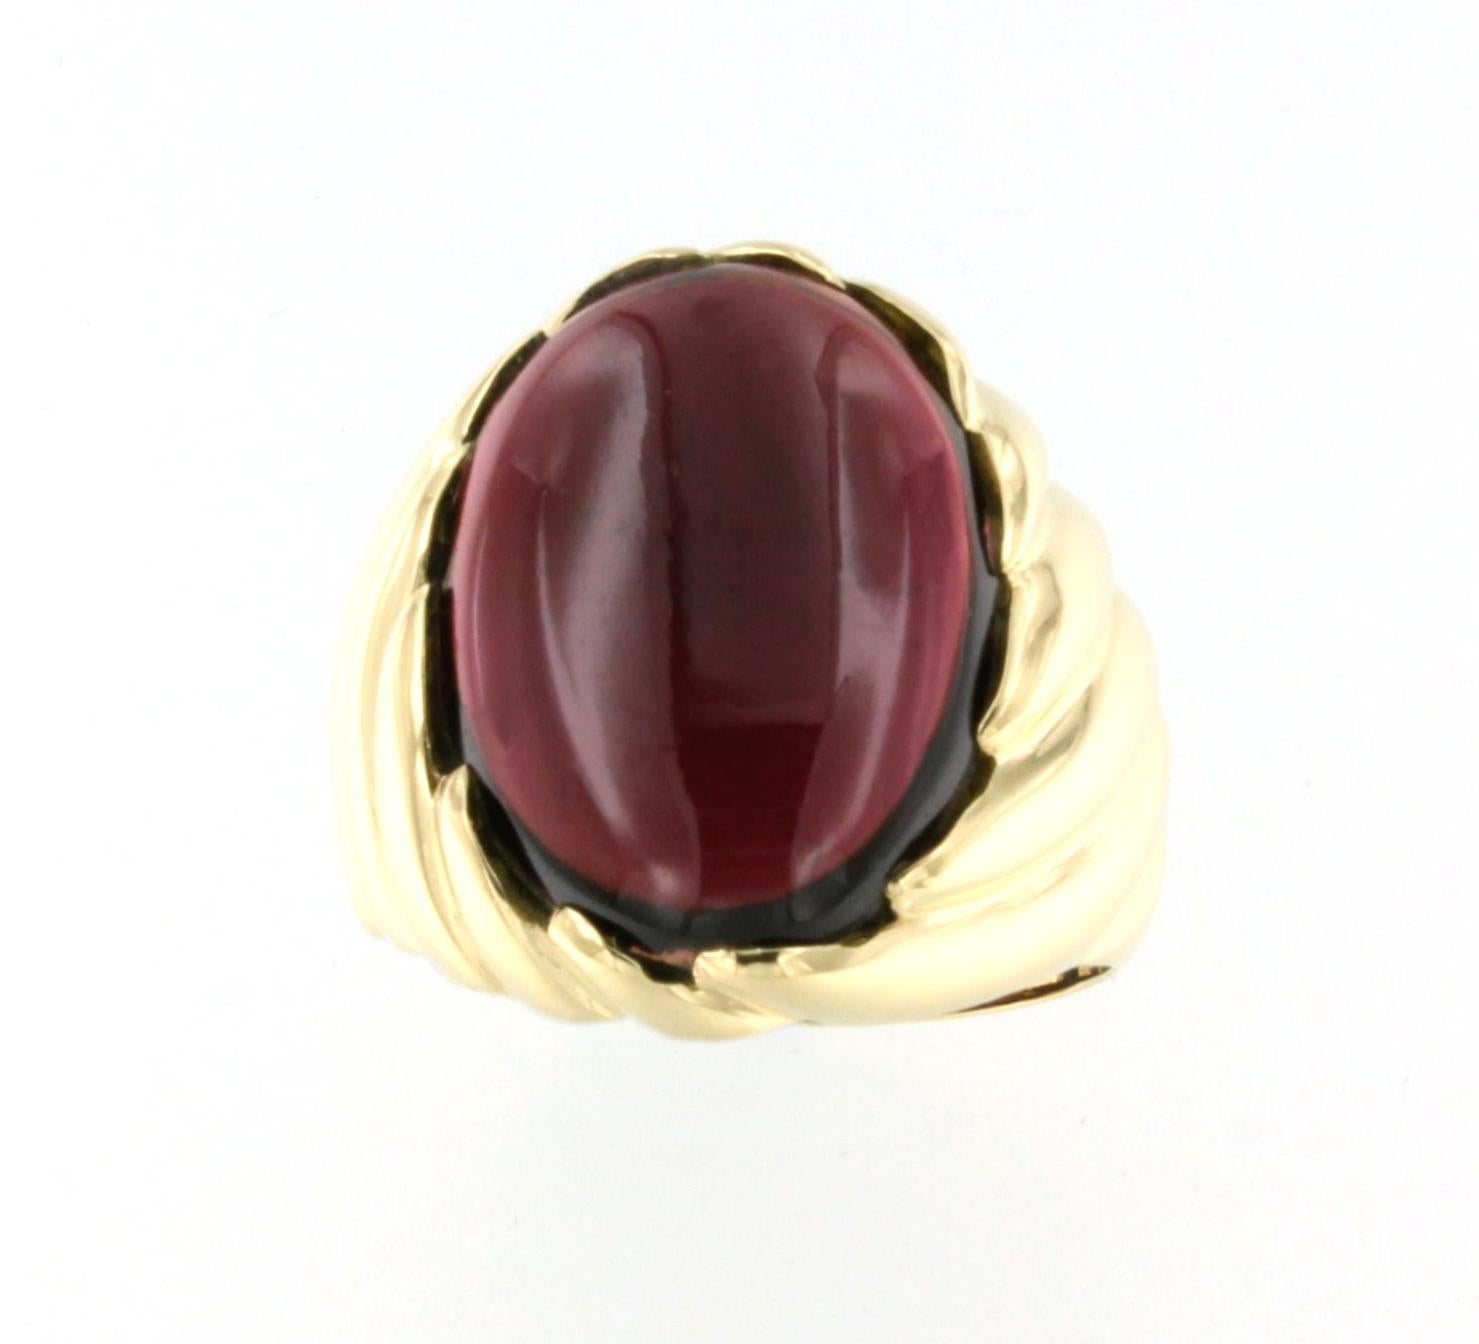 Rin in yellow gold 18 kt with Garnet (oval cabochon cut, size: 14x18 mm)

Size of ring: EU 14.5 - USA 54.5

All Stanoppi Jewelry is new and has never been previously owned or worn. Each item will arrive at your door beautifully gift wrapped in